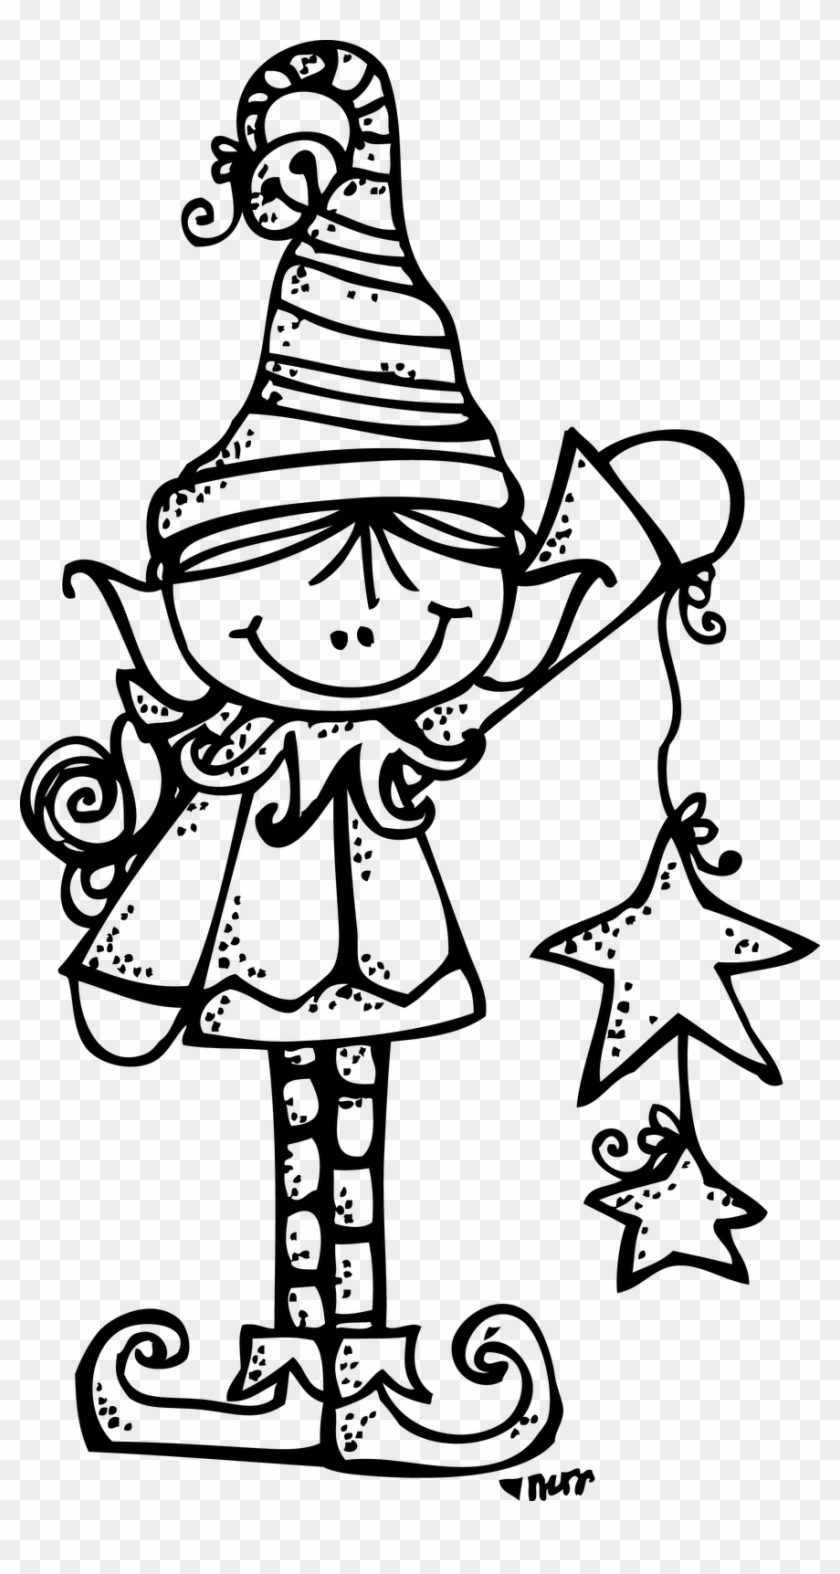 Melonheadz Boy Elf Clipart Black And White Clip Art Melonheadz Christmas Clipart Black And White Png Download 2897511 Pikpng